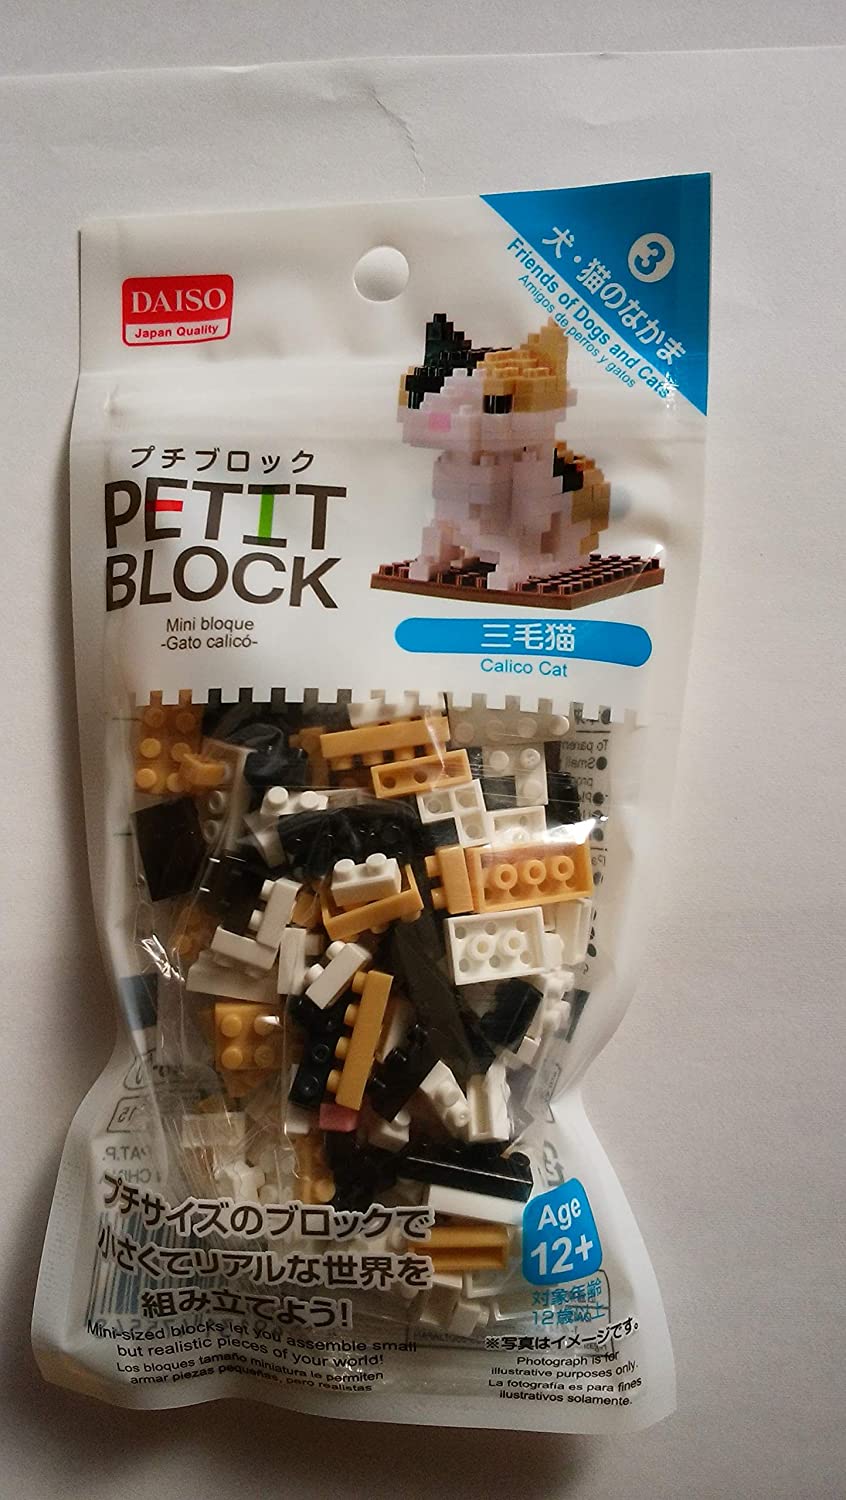 3 X Calico Cat Petit Block From Daiso Japan for sale online 